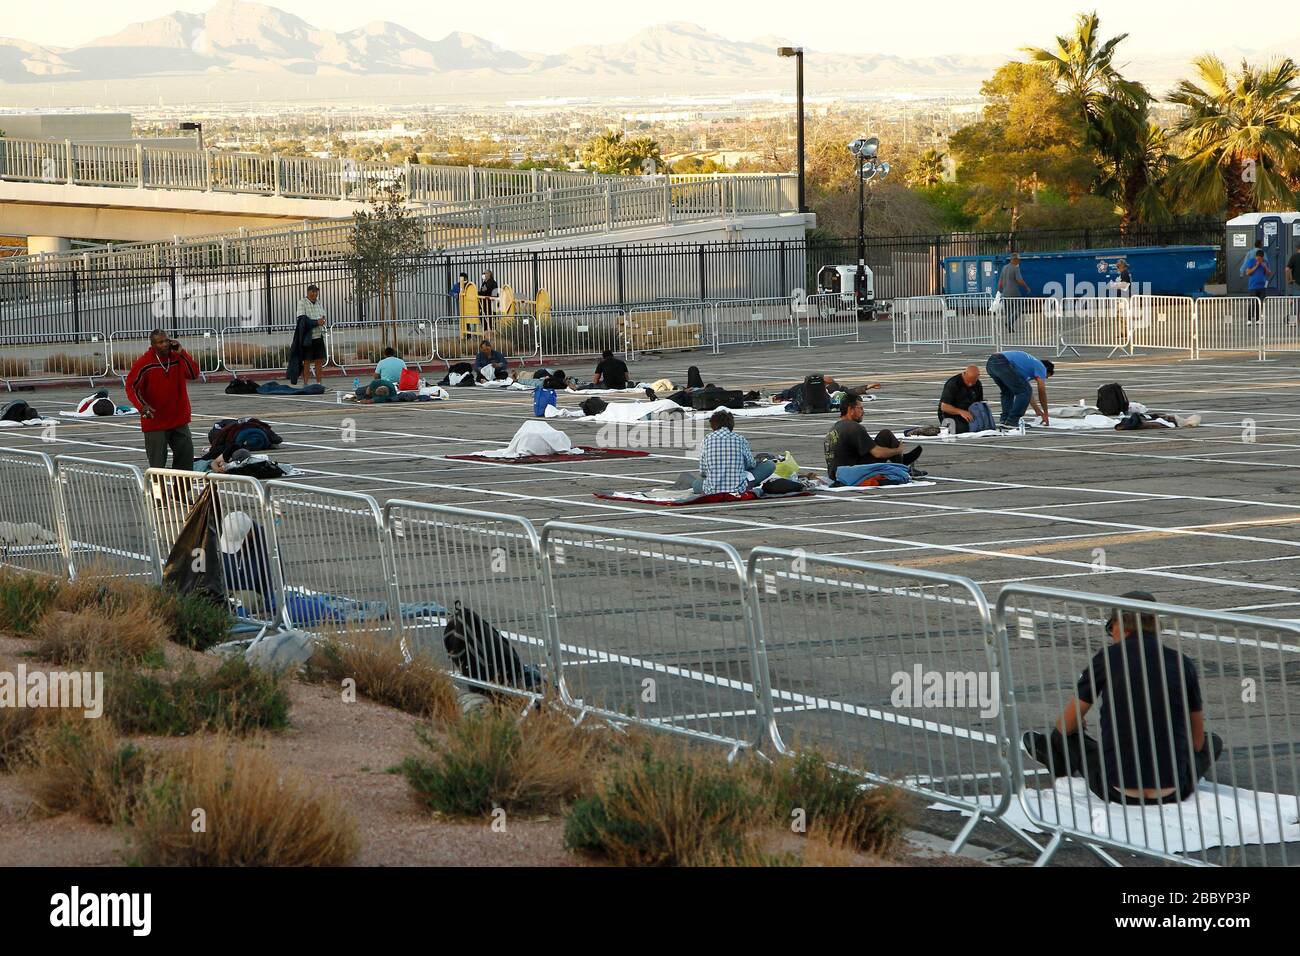 Las Vegas, United States. 01st Apr, 2020. A view of homeless individuals practicing self-distancing measures at a temporary shelter at the Cashman Center parking lot during the Coronavirus closure in Las Vegas, Nevada on Wednesday, April 1, 2020. Photo by James Atoa/UPI Credit: UPI/Alamy Live News Stock Photo